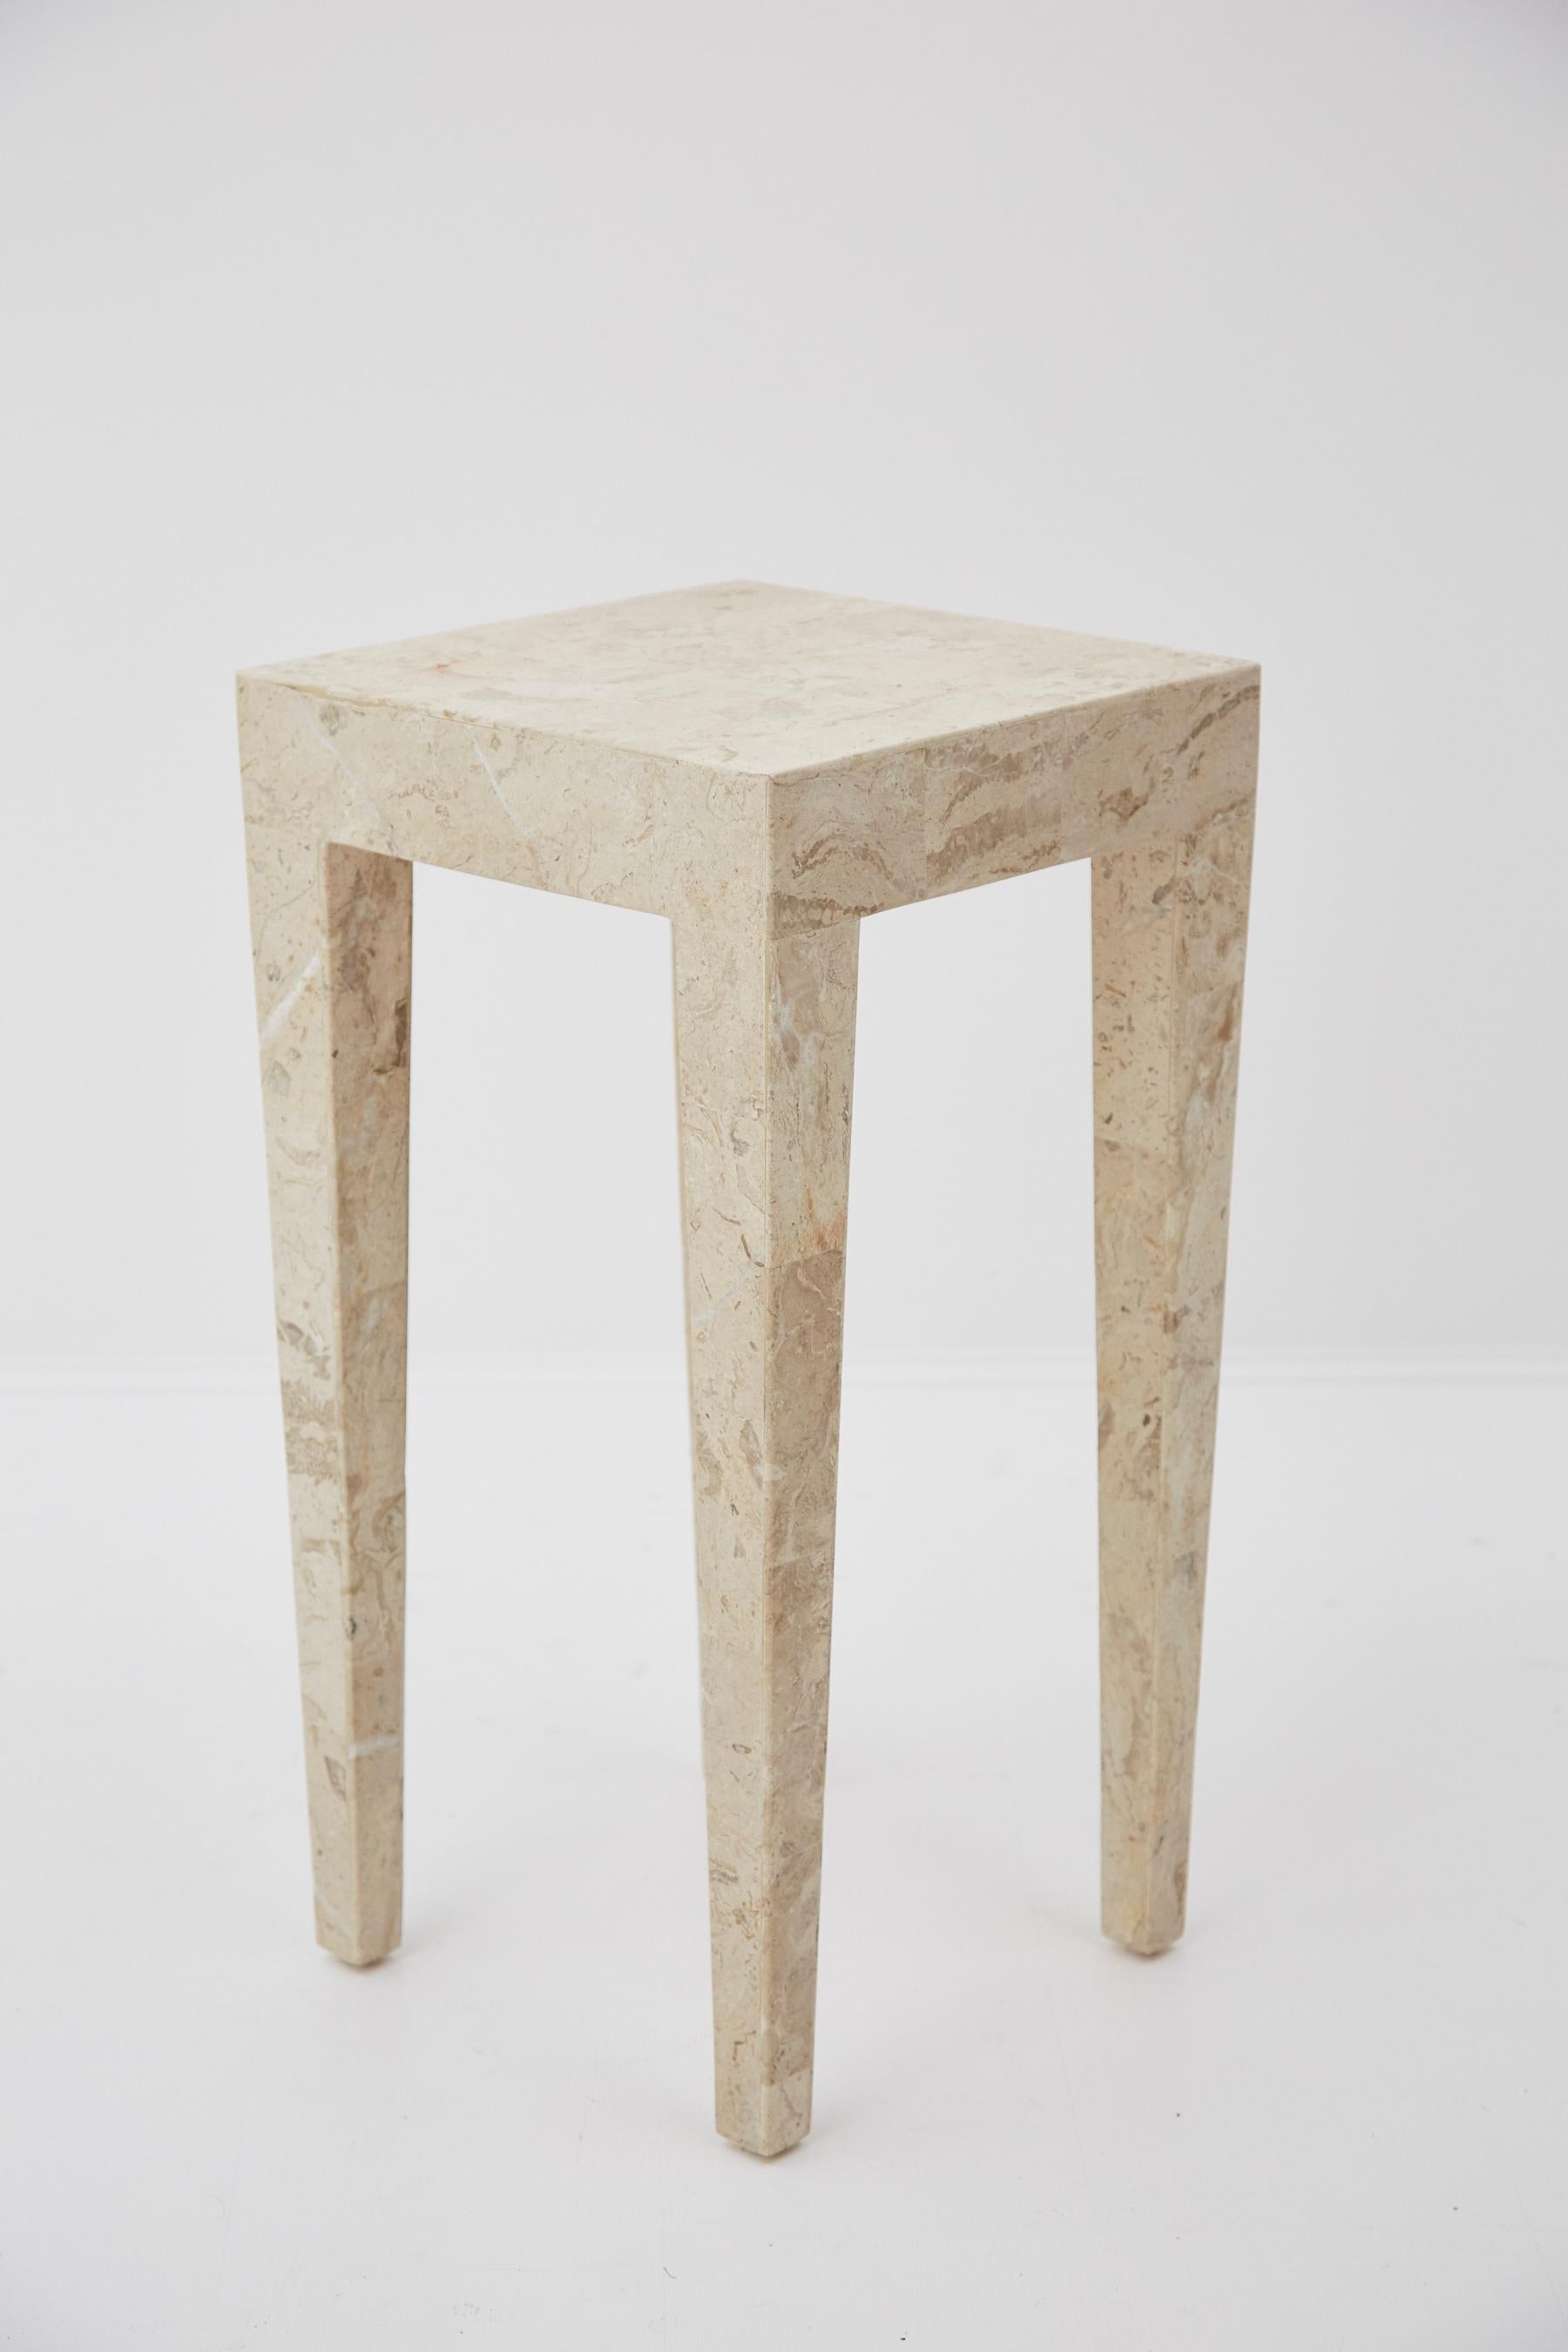 Tall side table comprised of fiberglass body inlaid with tessellated Cantor stone throughout. A simple and modern form to add form and texture to any interior. Measures: 27 inch high.